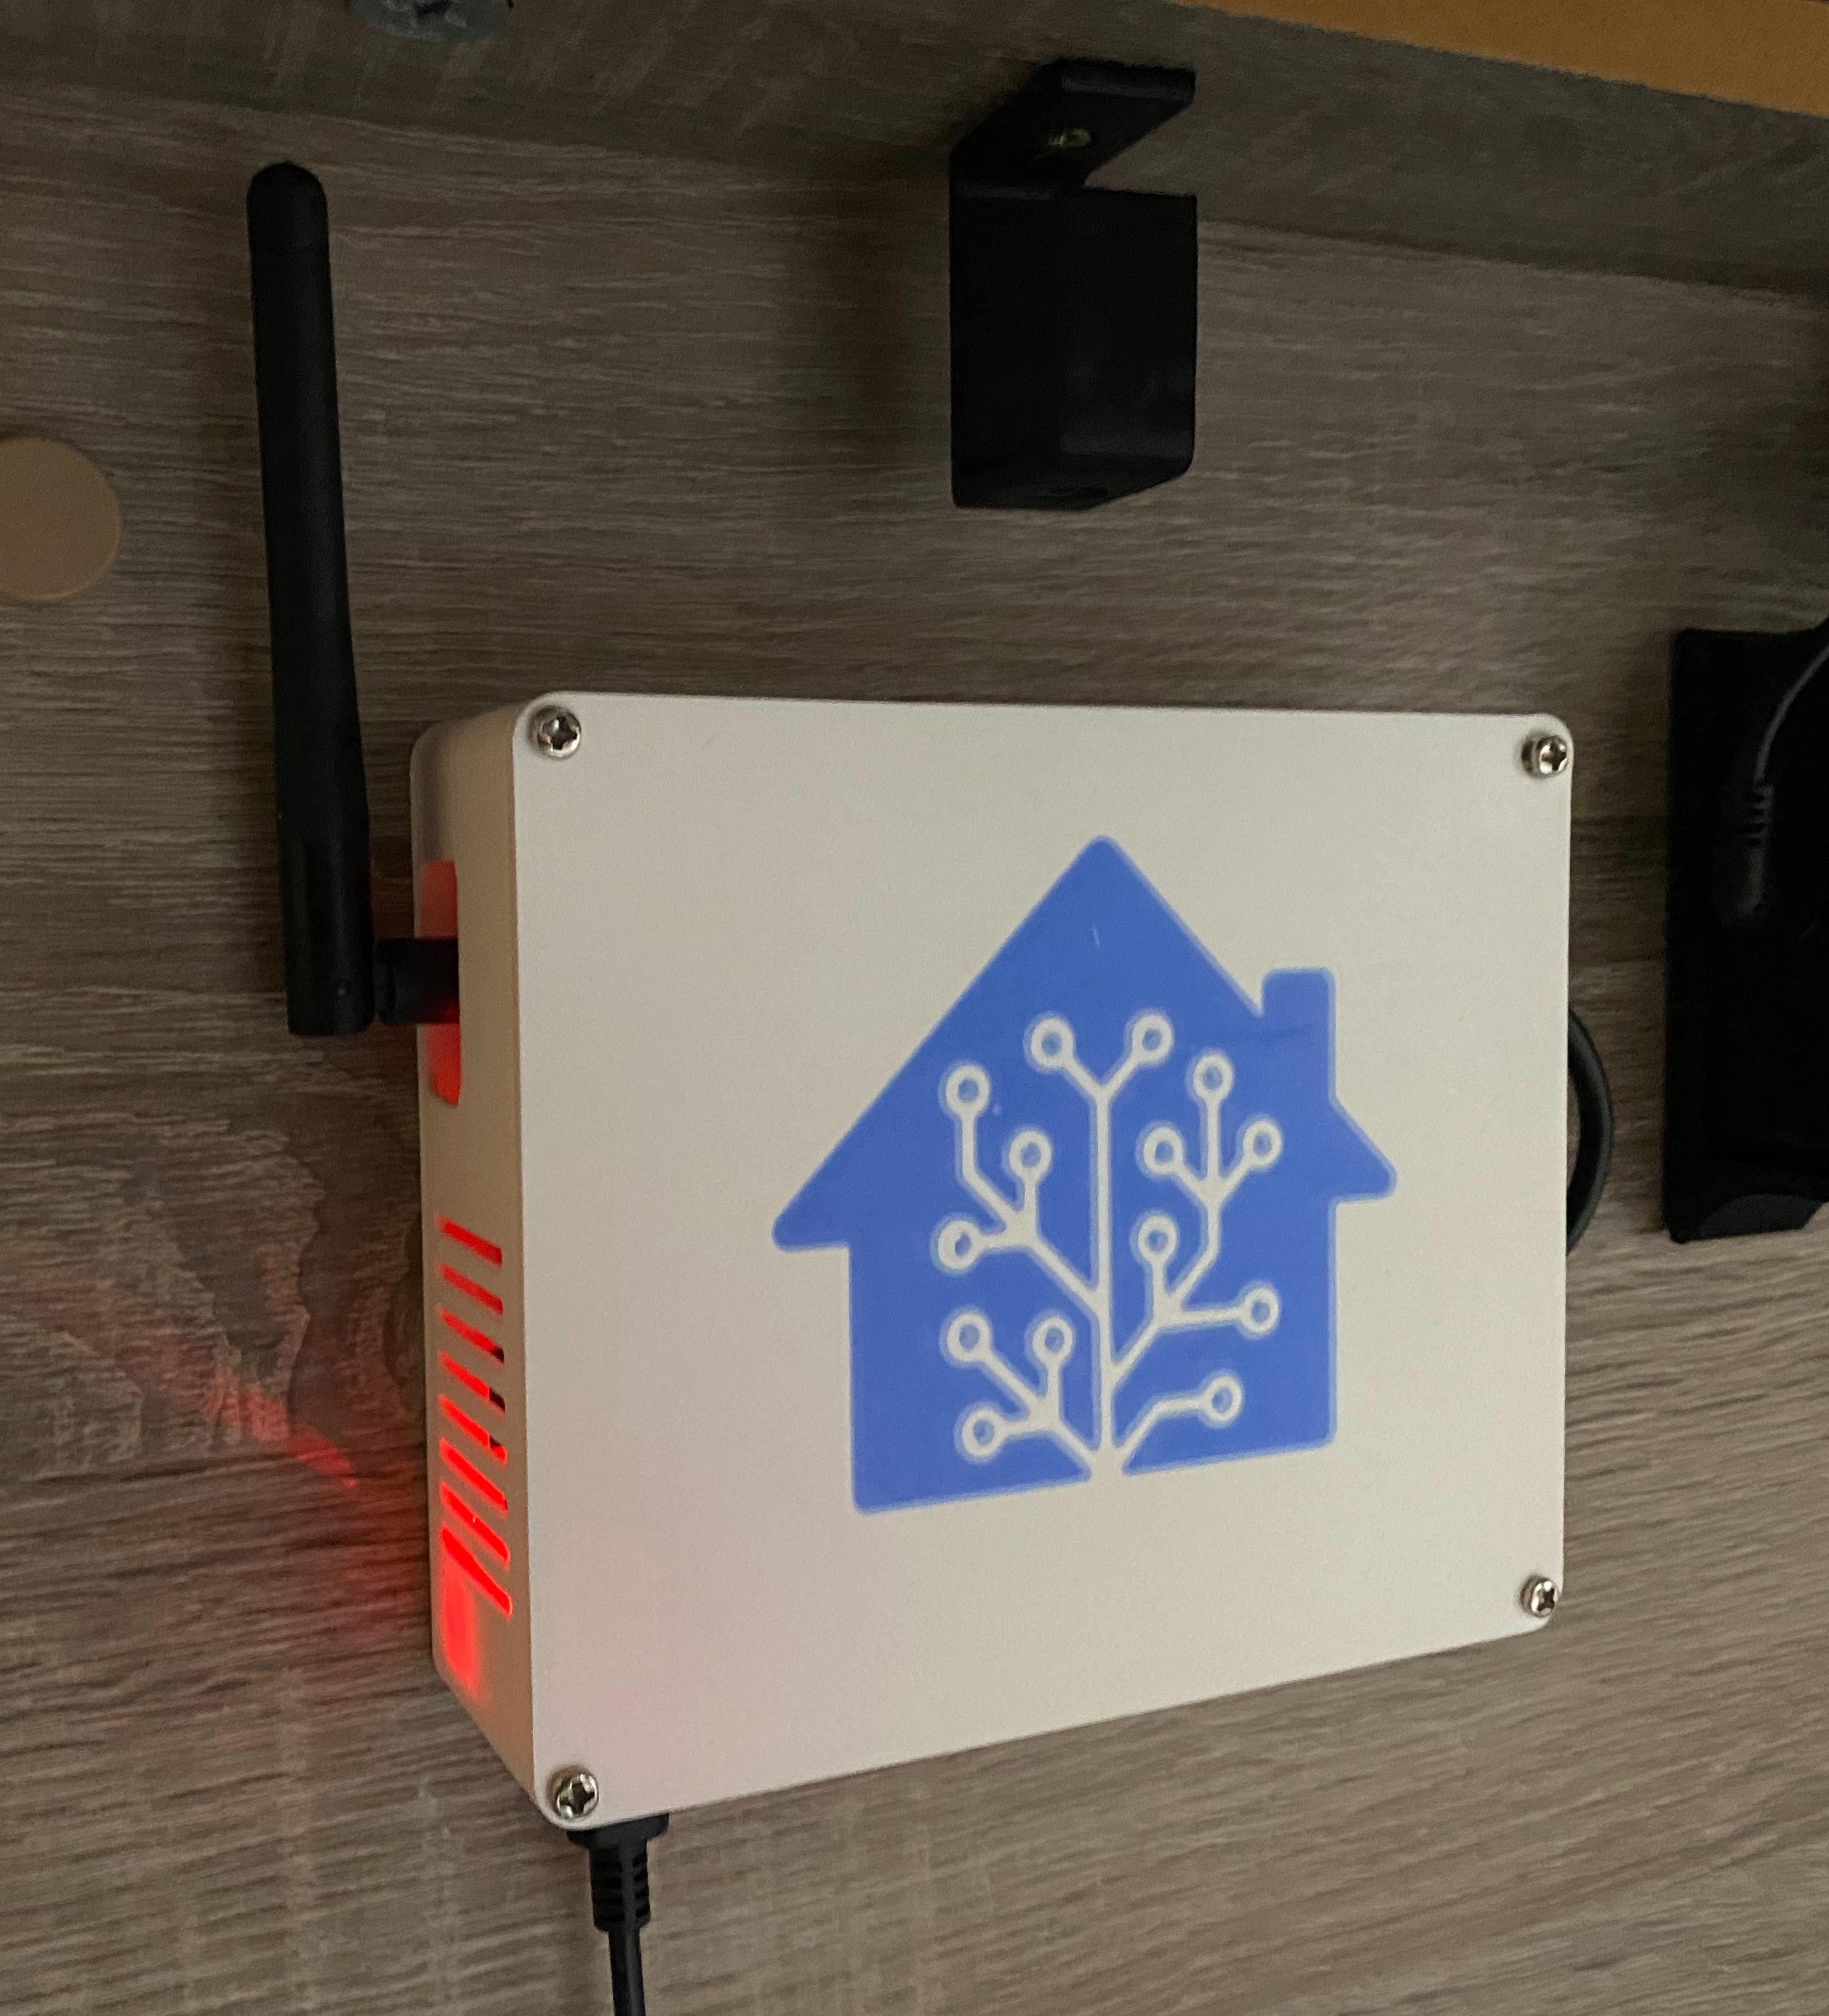 Raspberry Pi wall-mount box for Home Assistant